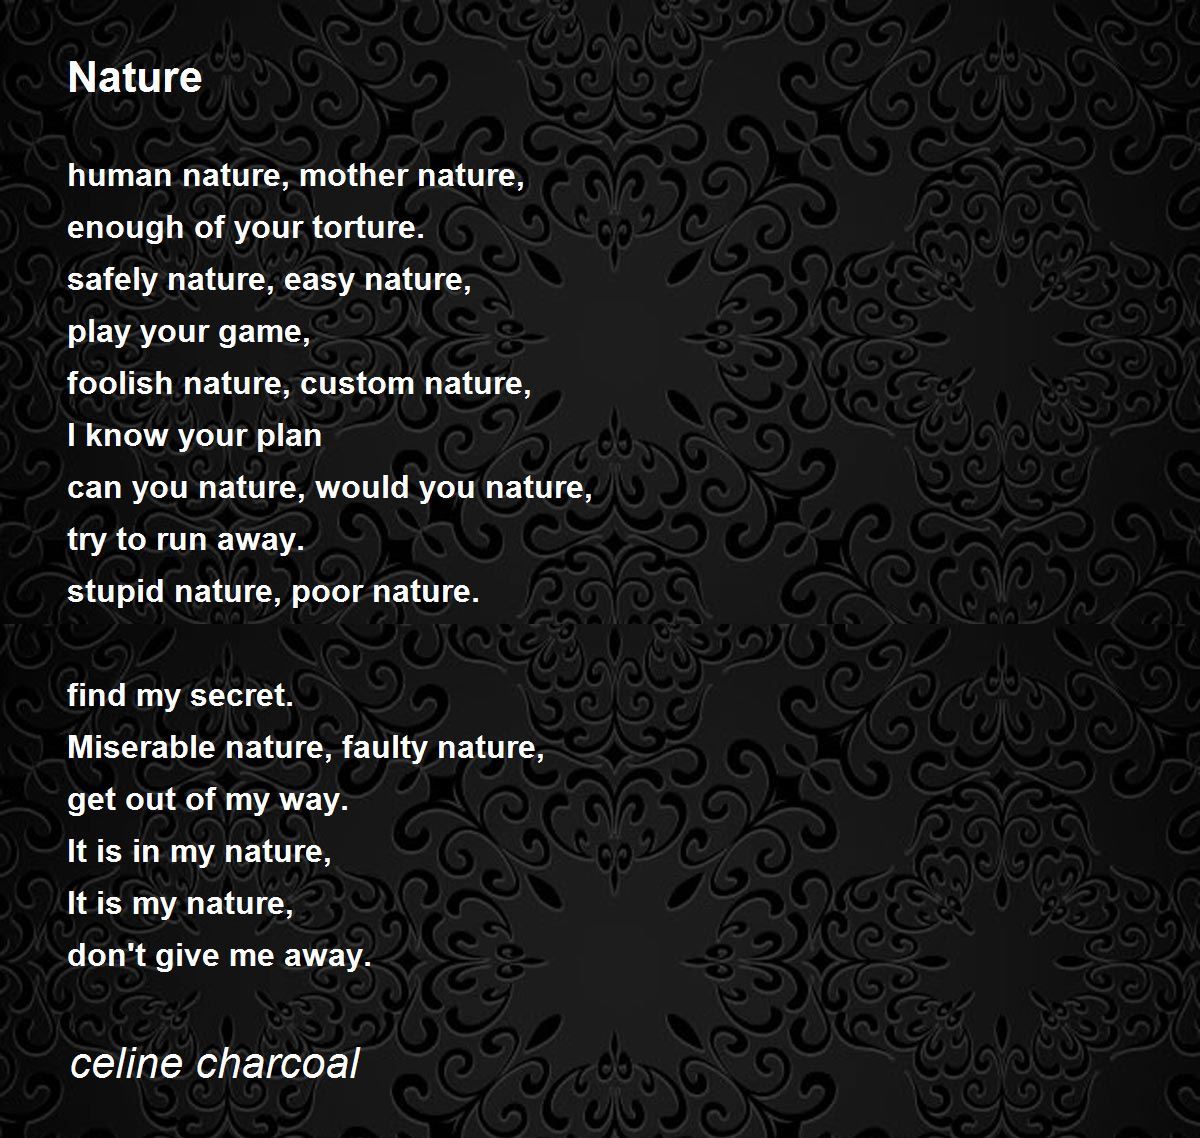 what does each poem suggest about humans and nature